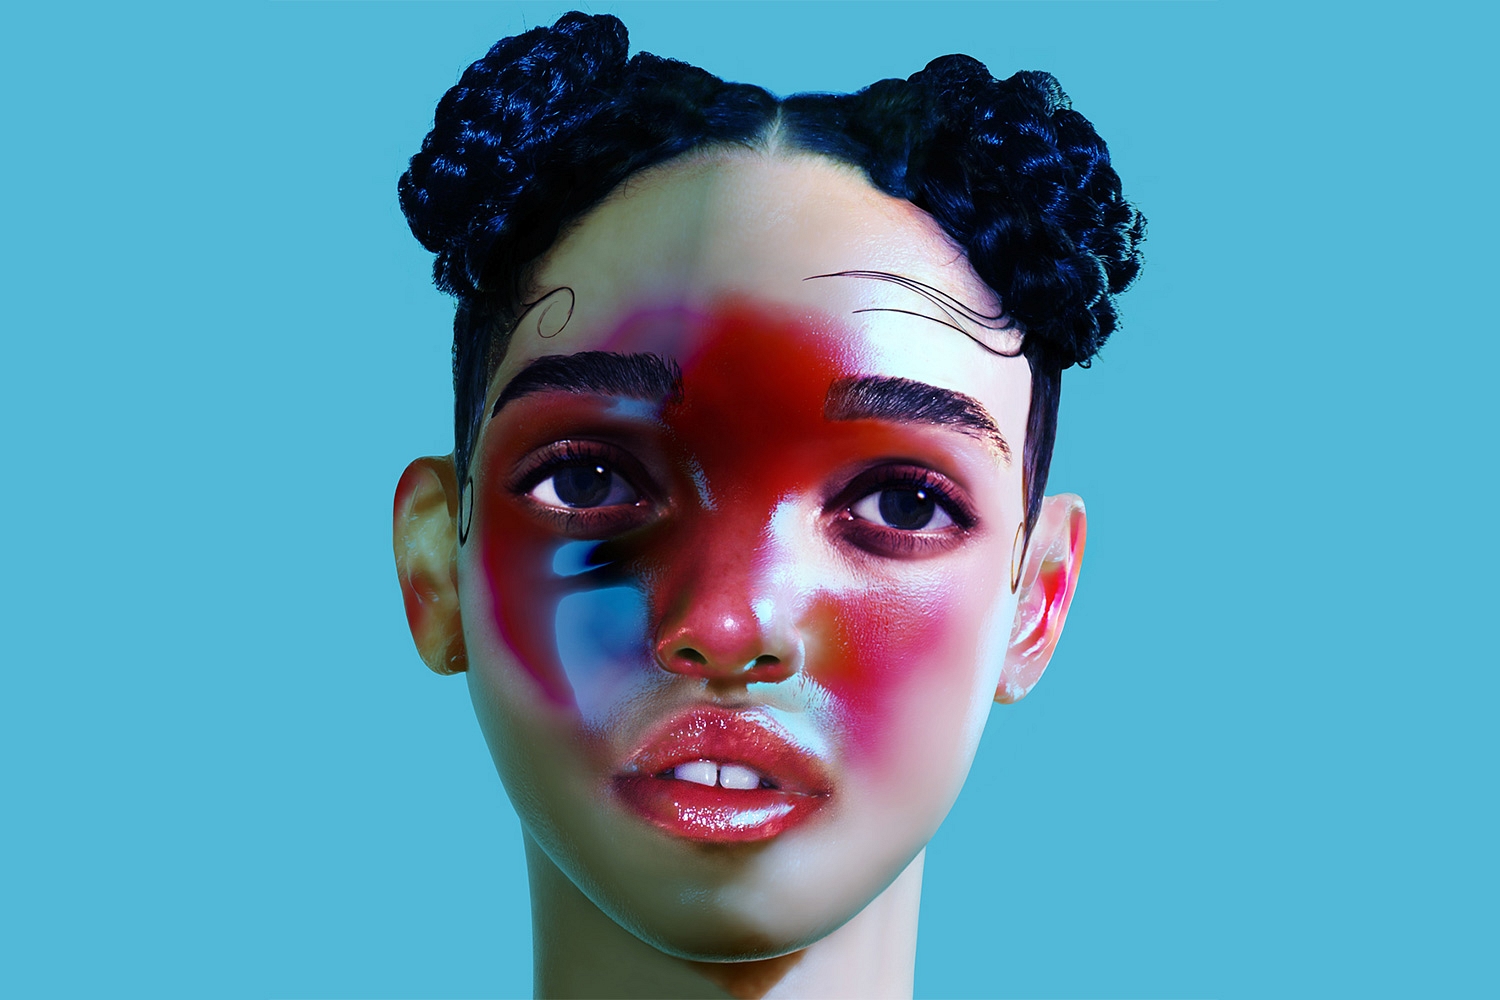 FKA Twigs covers Sam Smith’s ‘Stay With Me’